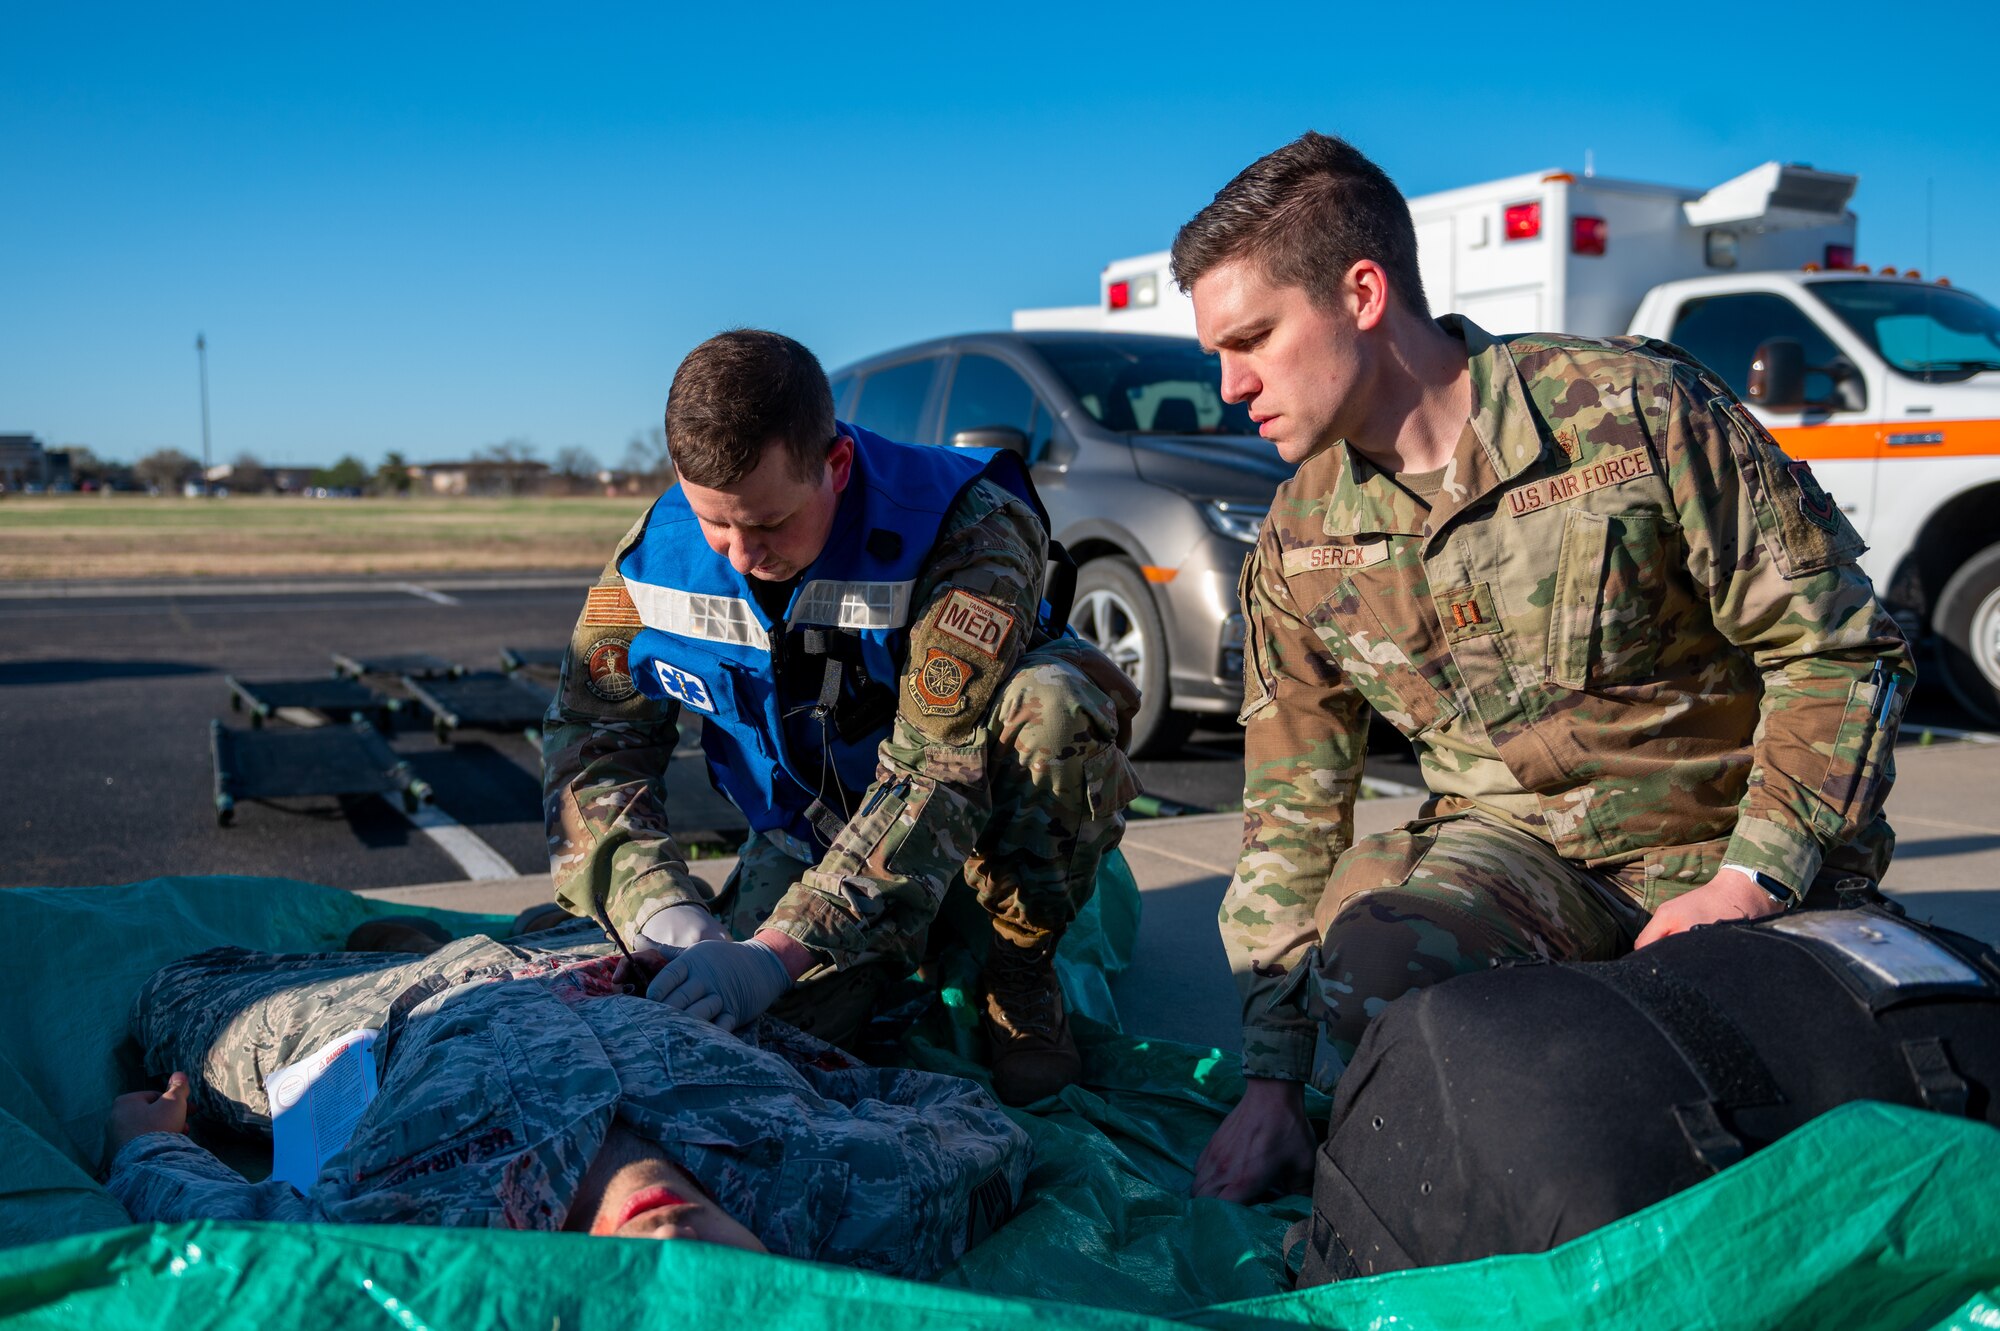 Senior Airman Sean Skinner, 22nd Operational Medical Readiness Squadron flight operational medical technician, and Capt. Jordan Serck 22nd OMRS, element chief of base operational medicine clinic, perform Tactical Combat Casualty Care on a simulated injury during Exercise Ready Eagle April 8, 2022, at McConnell Air Force Base, Kansas